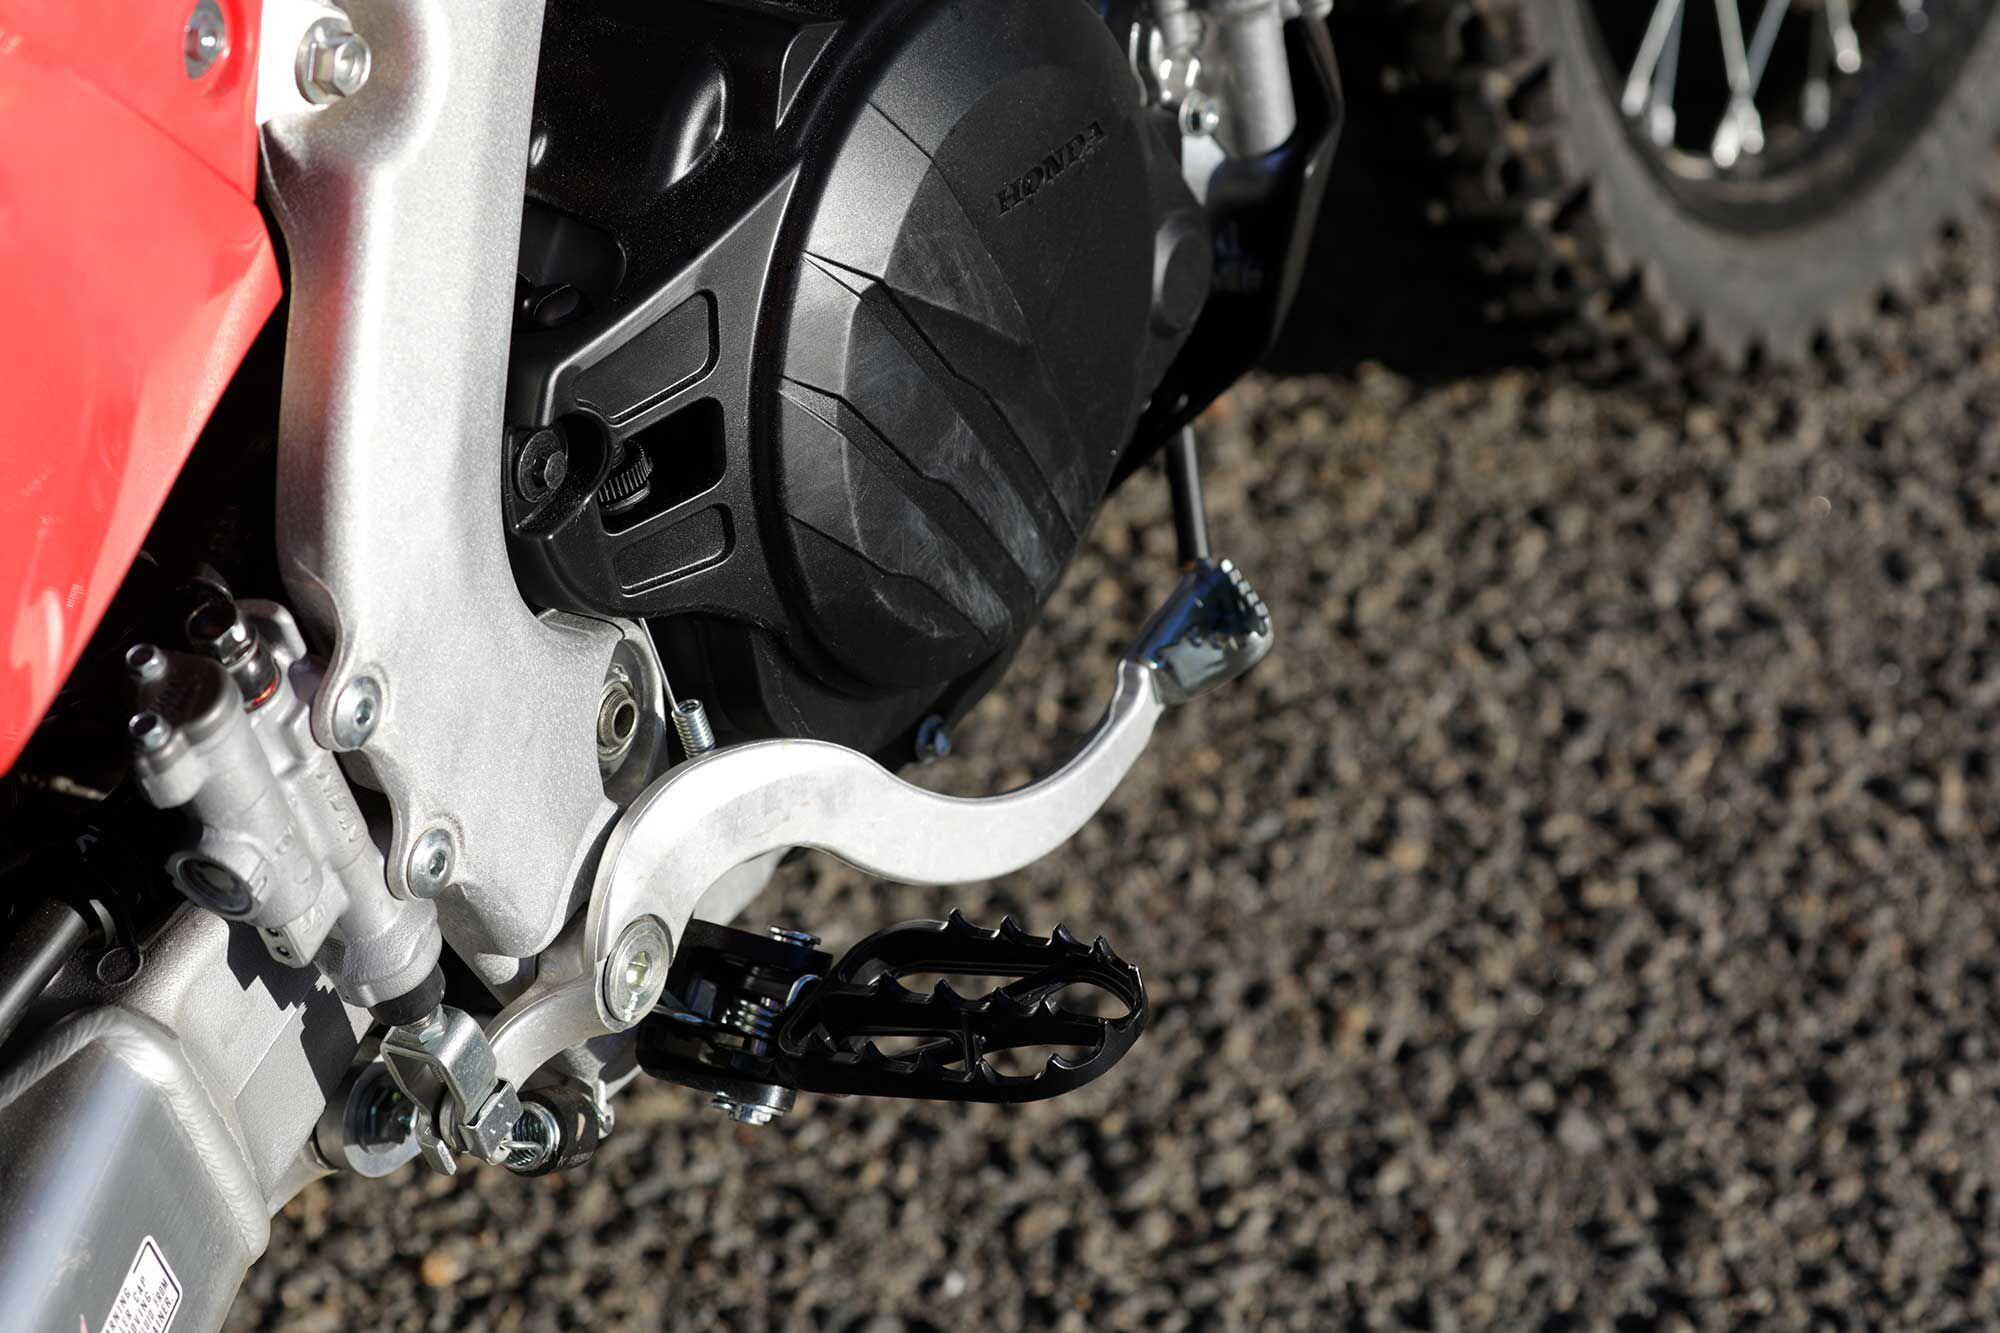 We appreciate the above-average size of the rider’s footpegs compared to other manufacturers’ dual sport offerings.